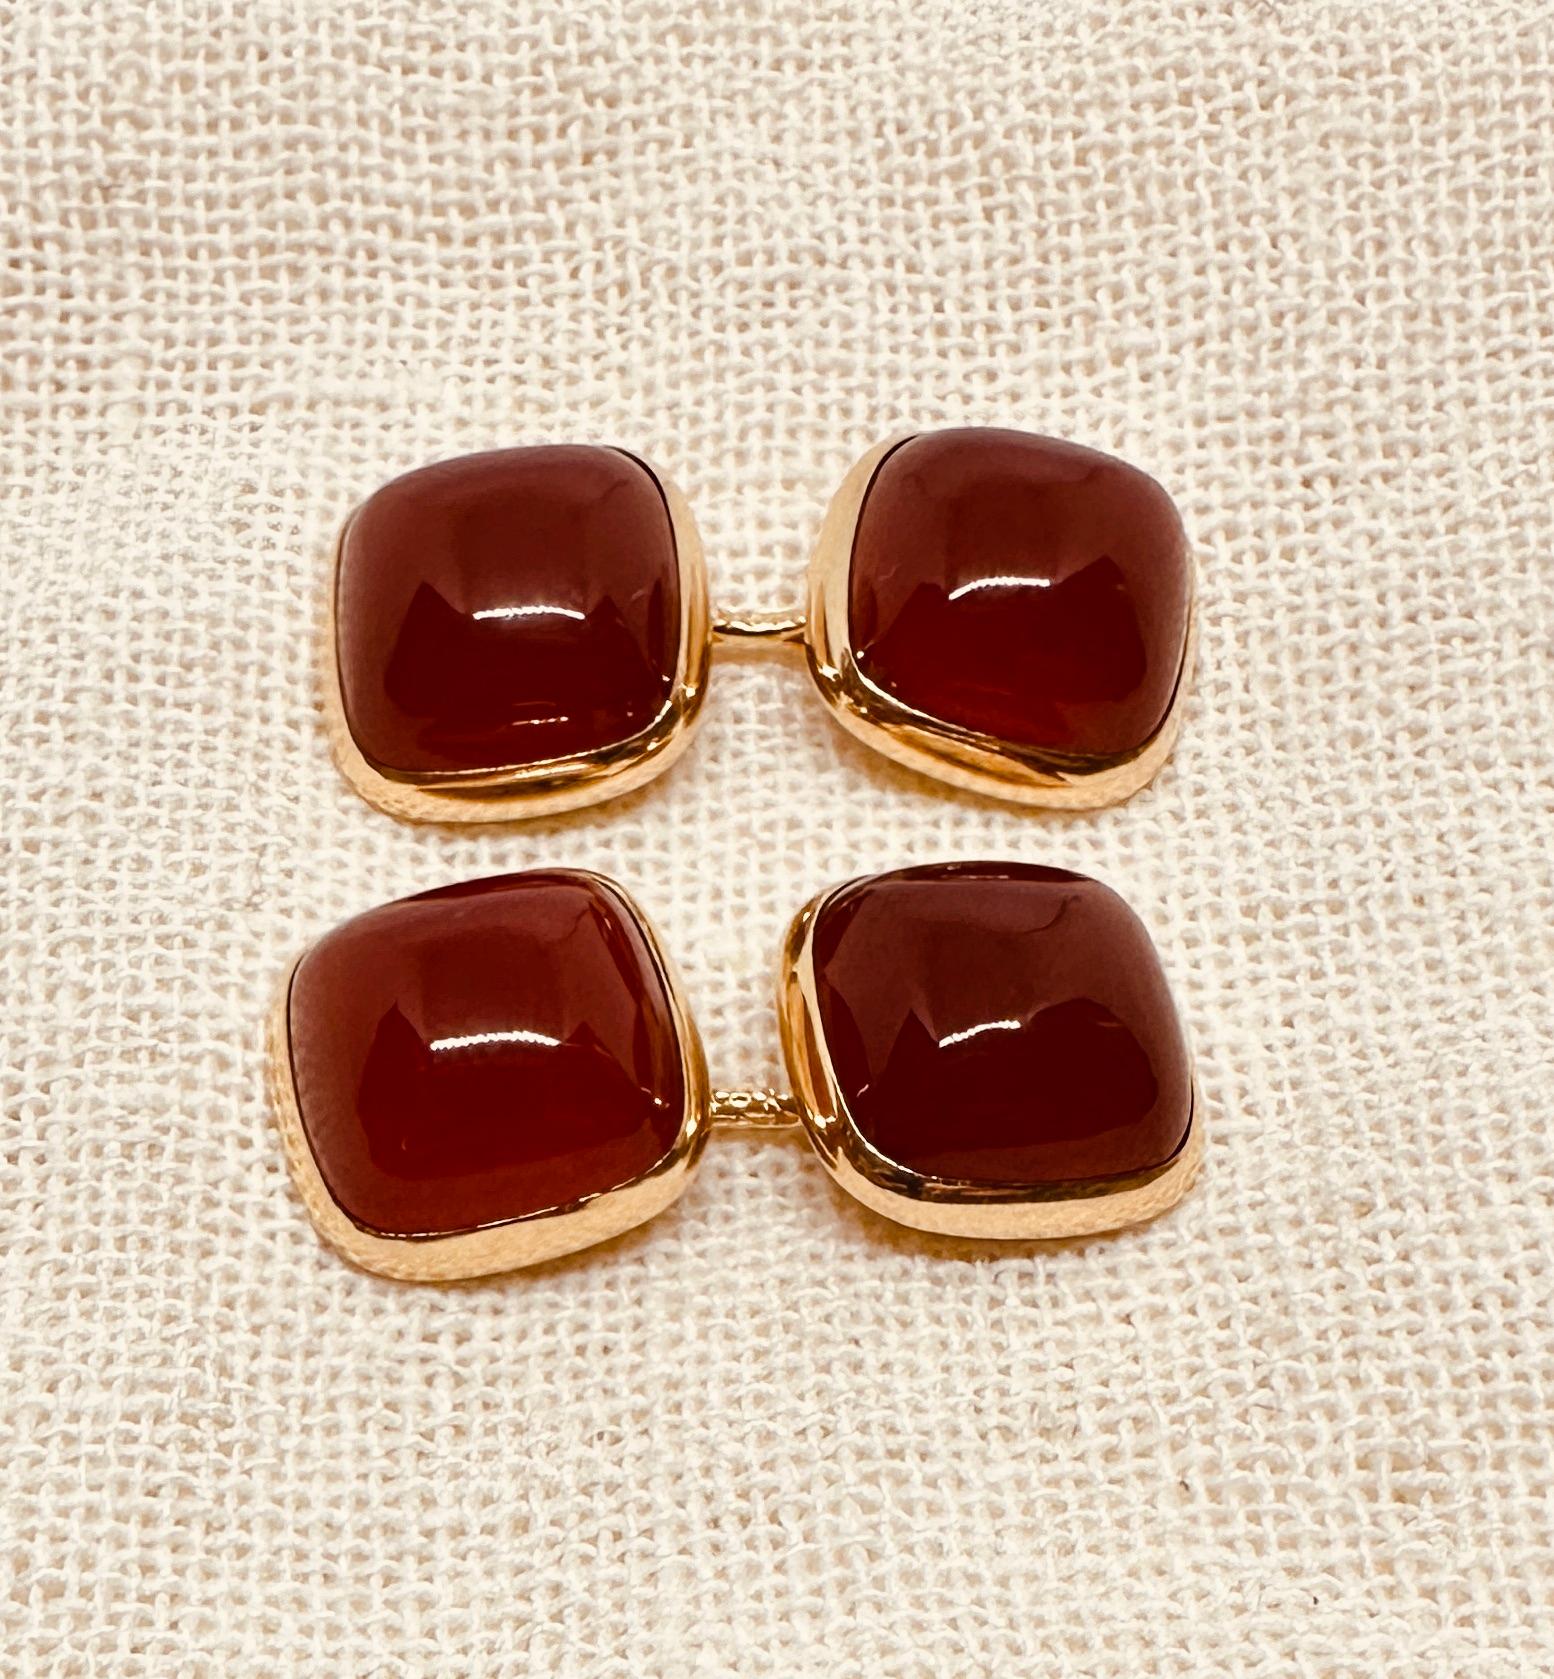 A wonderful pair of Art Deco cufflinks by renowned American maker Larter & Sons, who produced cufflinks and other fine jewelry for Tiffany & Co and many other famous New York retailers.

These feature four square cabochon-cut carnelian stones set in